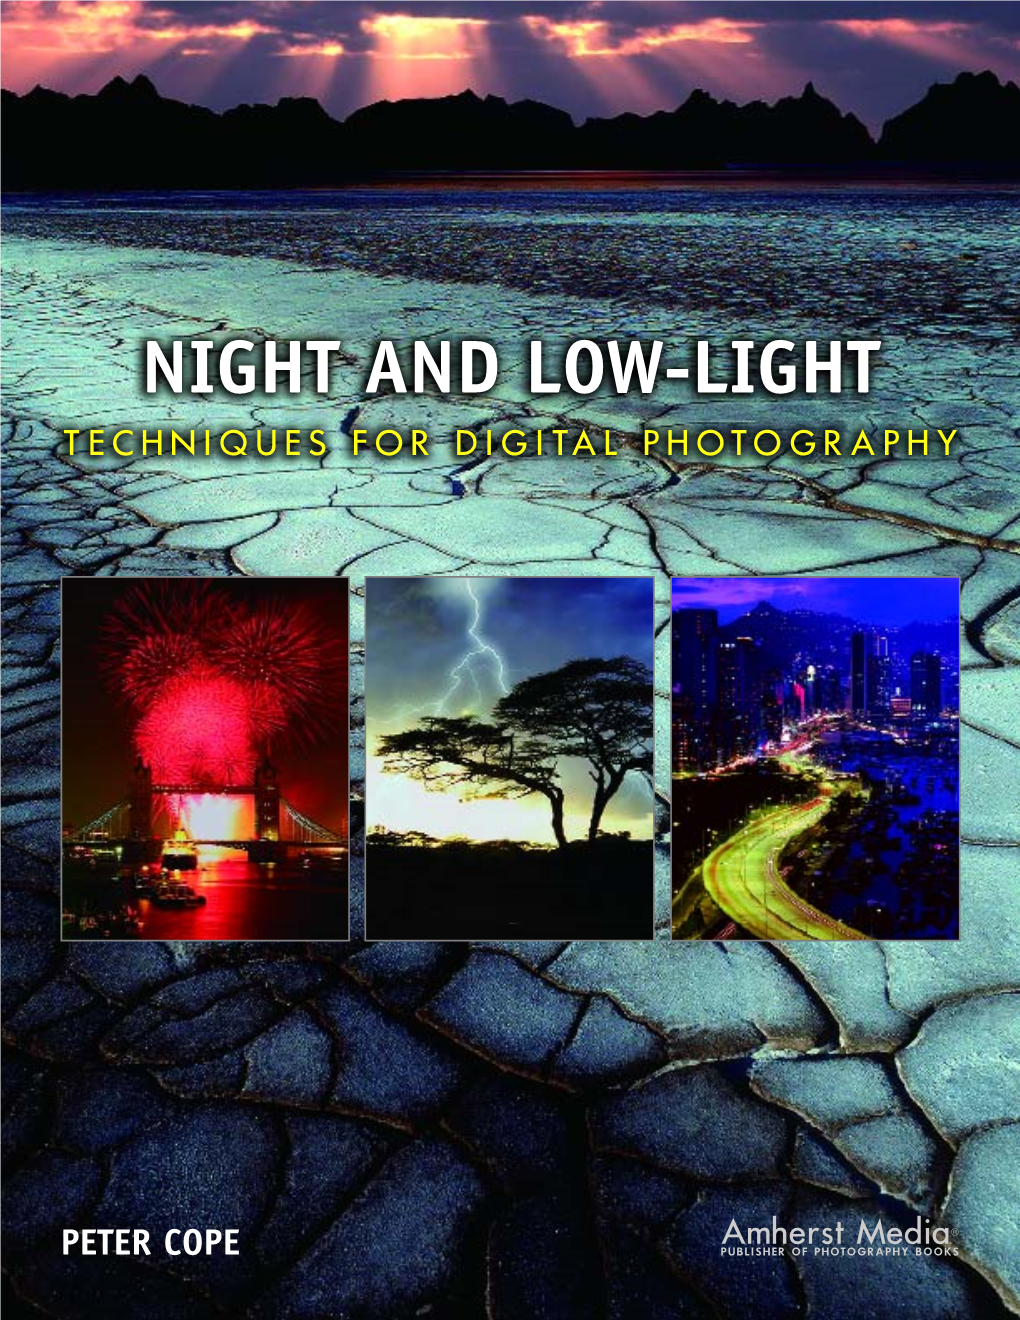 Peter Cope. Night and Low-Light Techniques for Digital Photography.2006